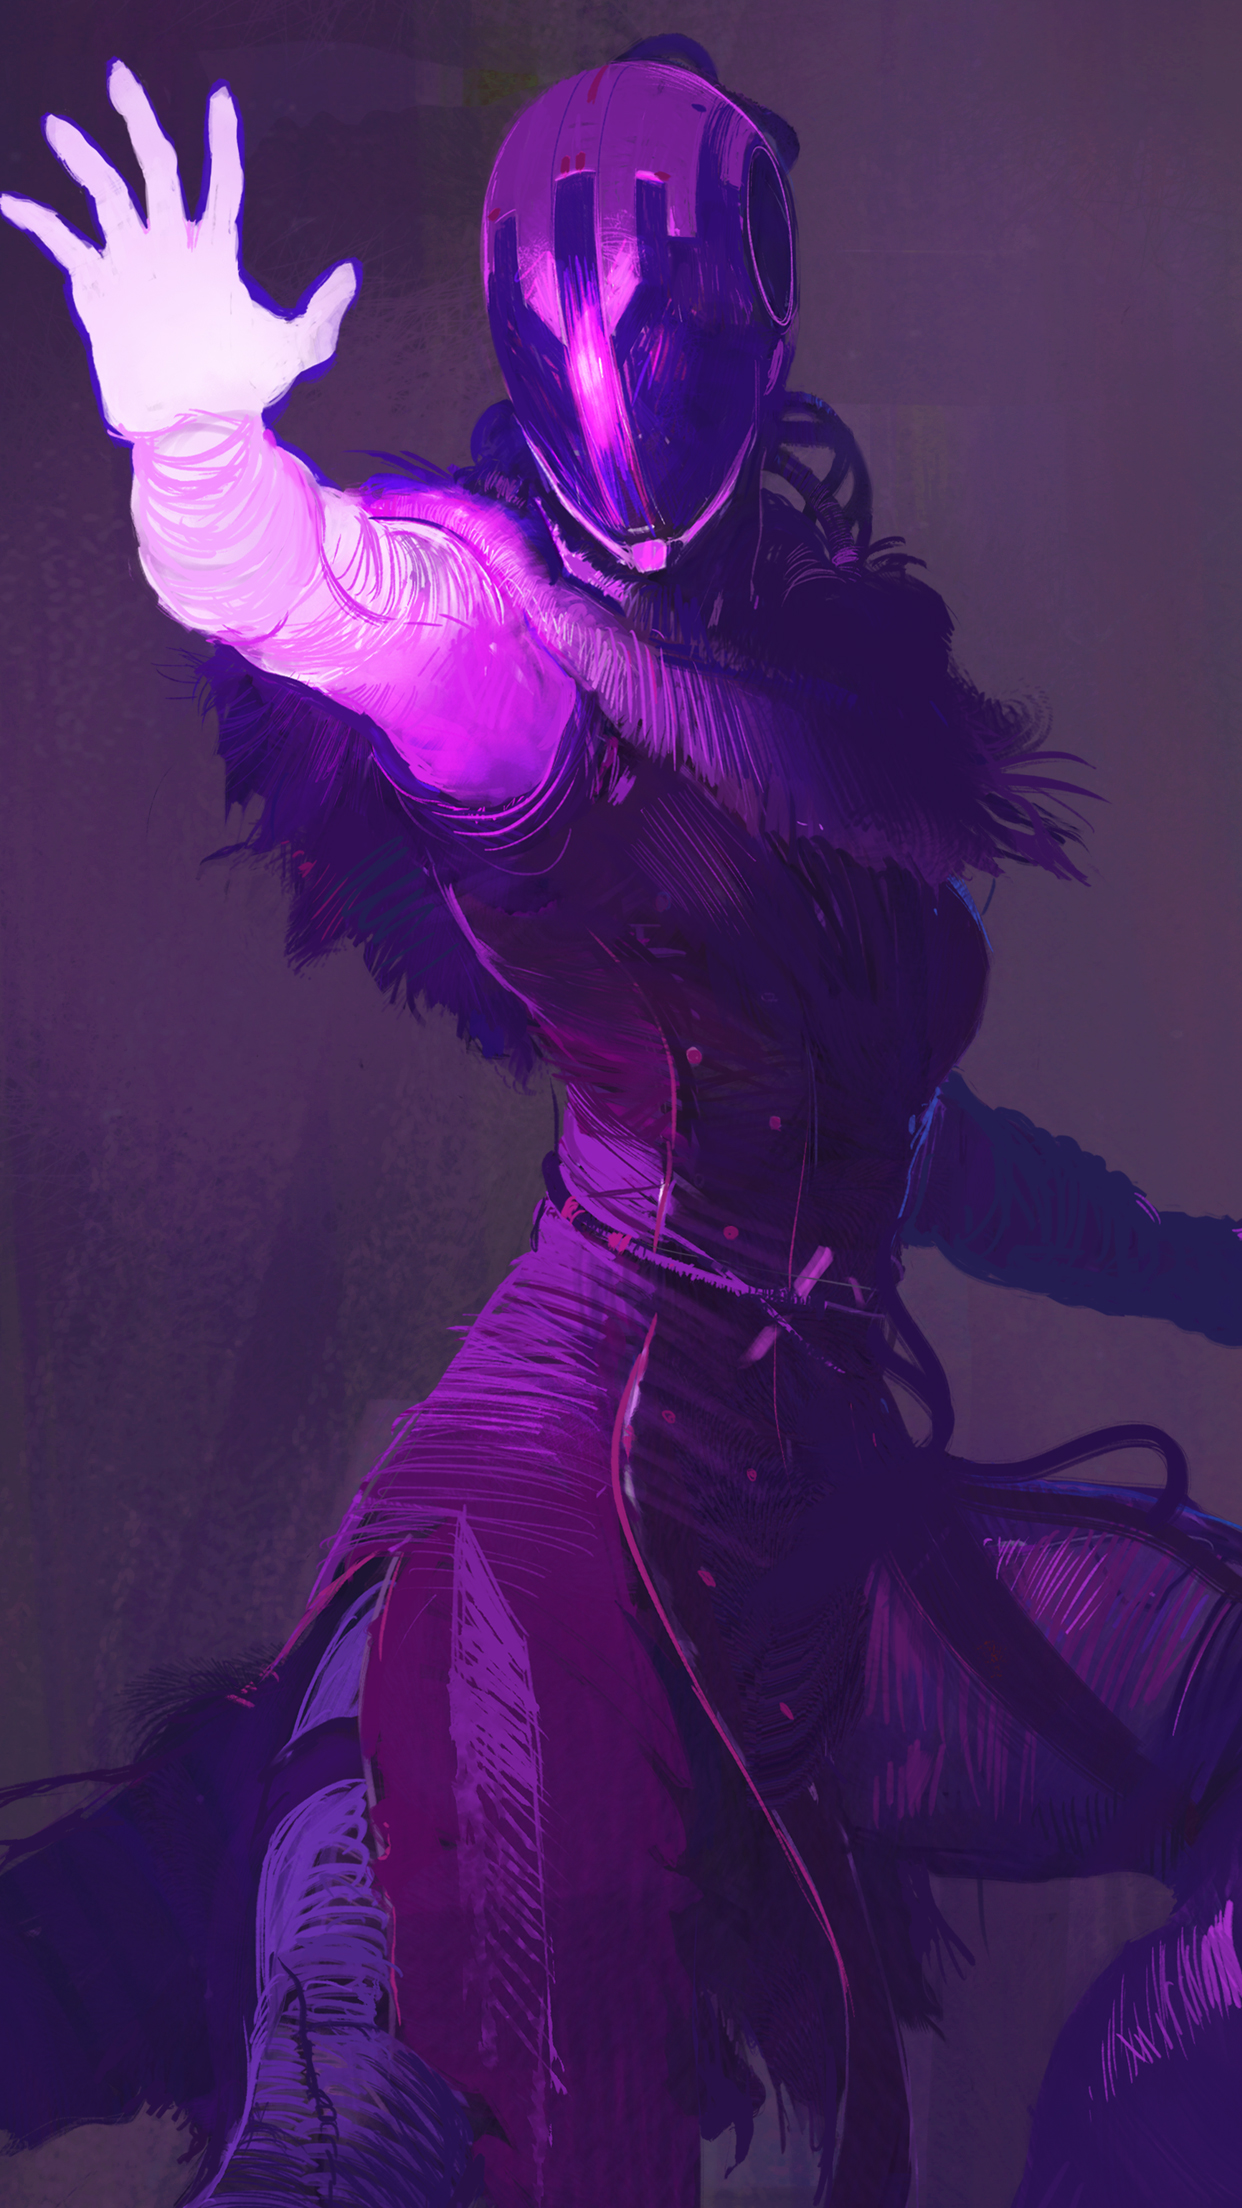 Destiny 2 themed phone wallpaper featuring a stylized Guardian in purple tones.